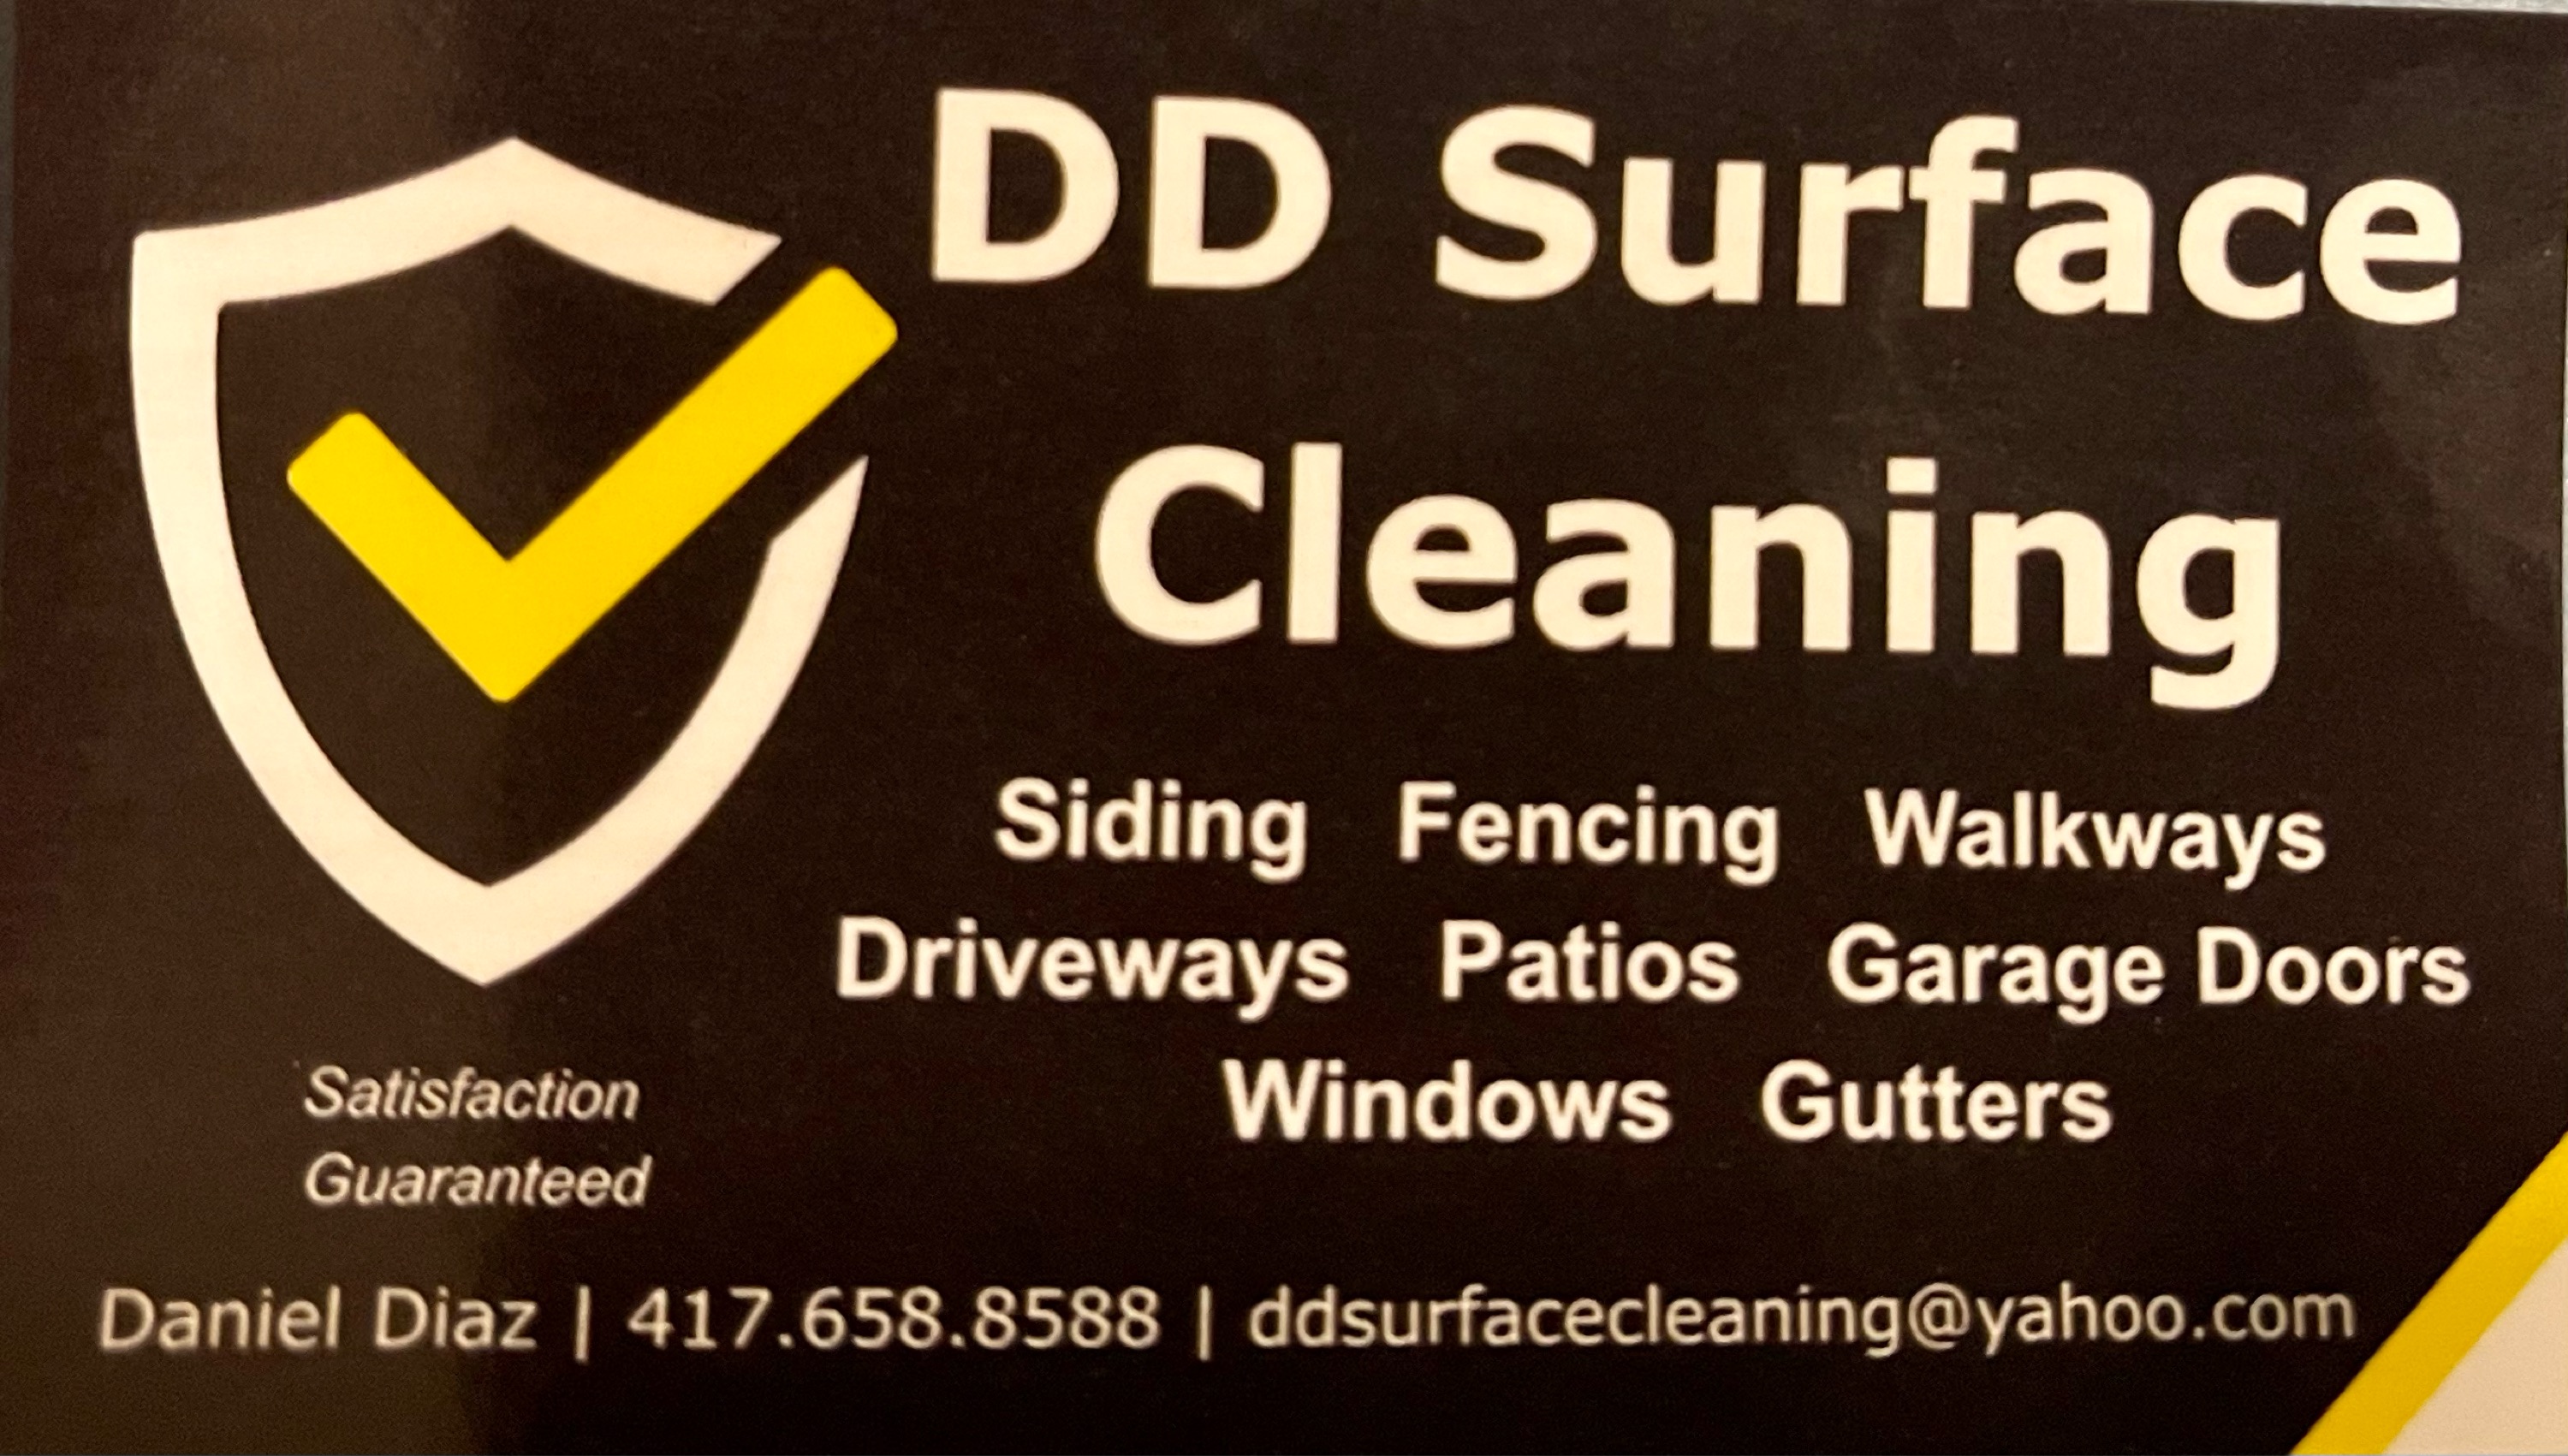 DD Surface Cleaning Logo